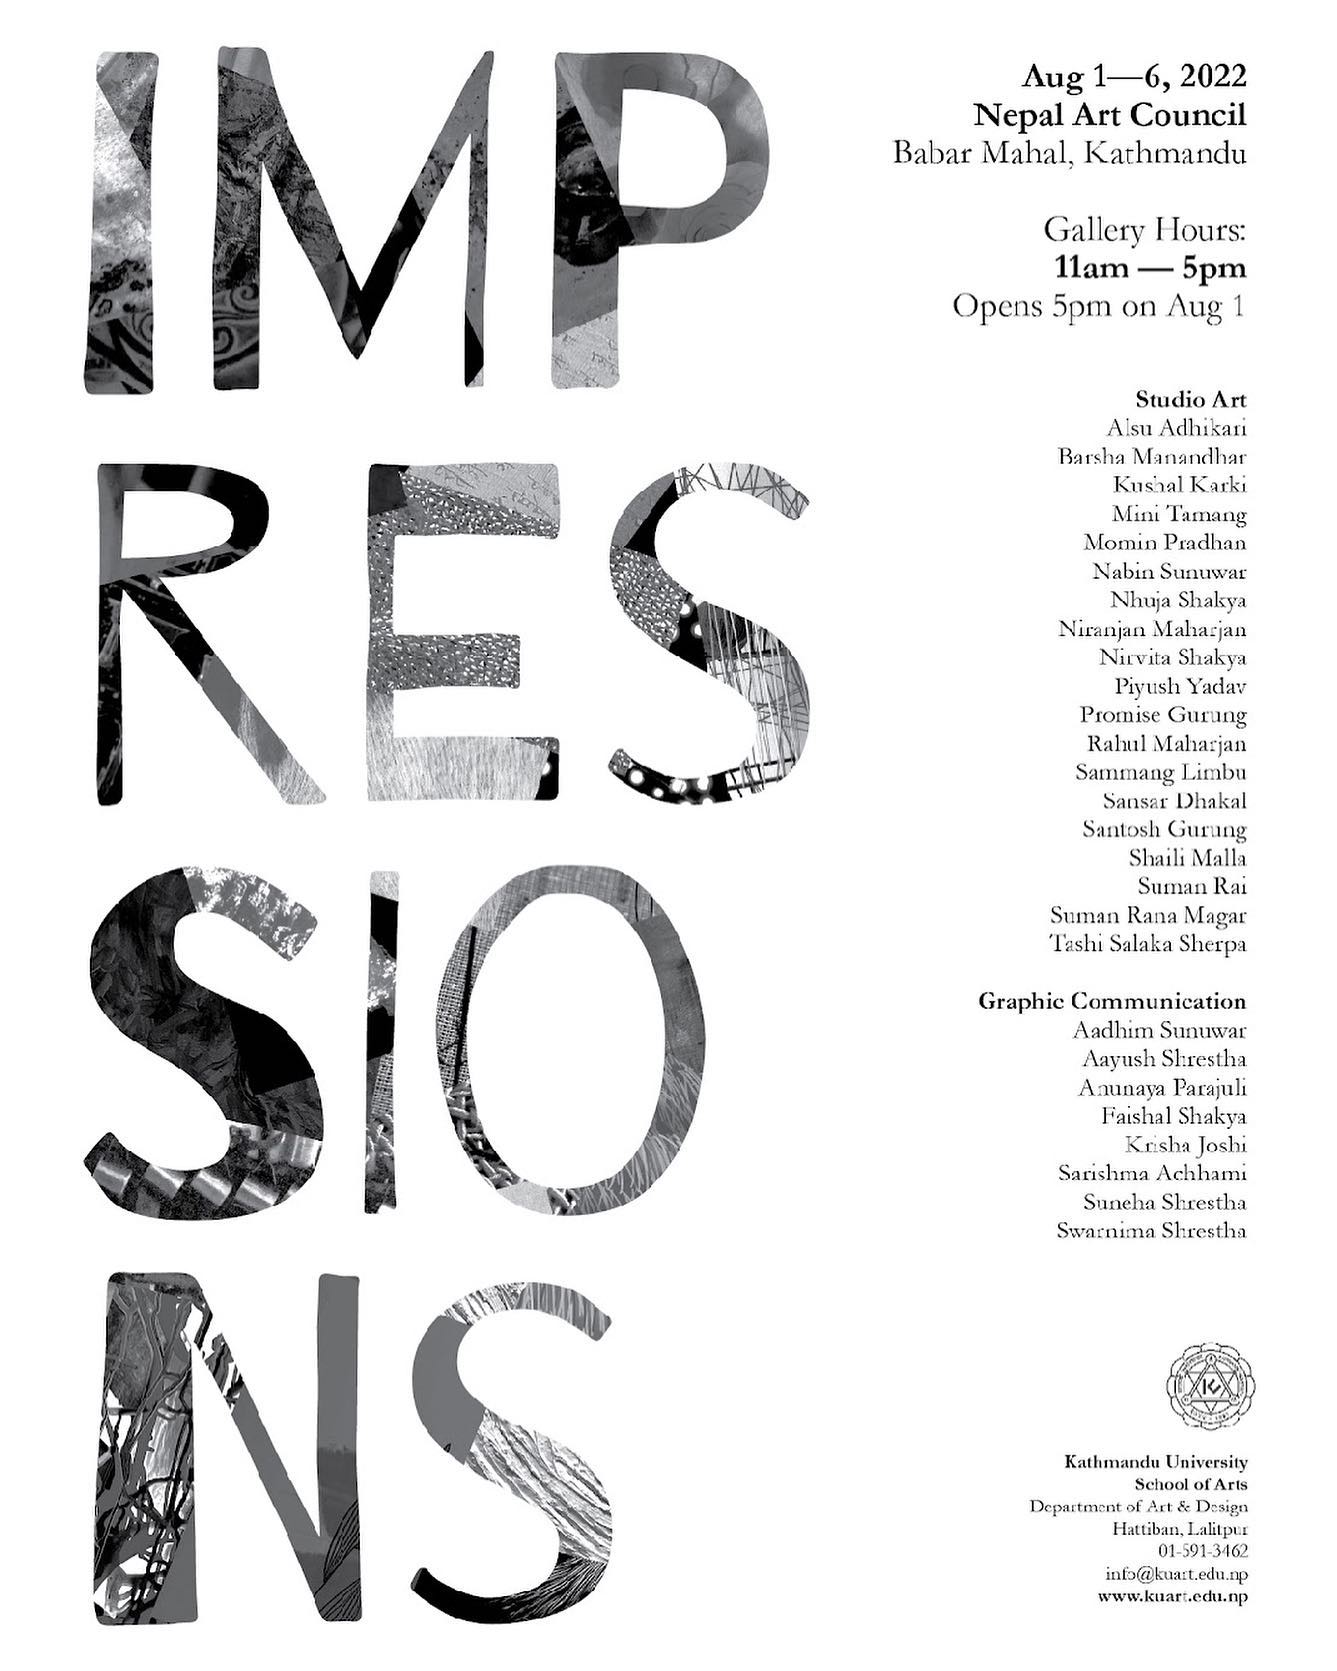 IMPRESSIONS, the BFA Exhibition Project 2022